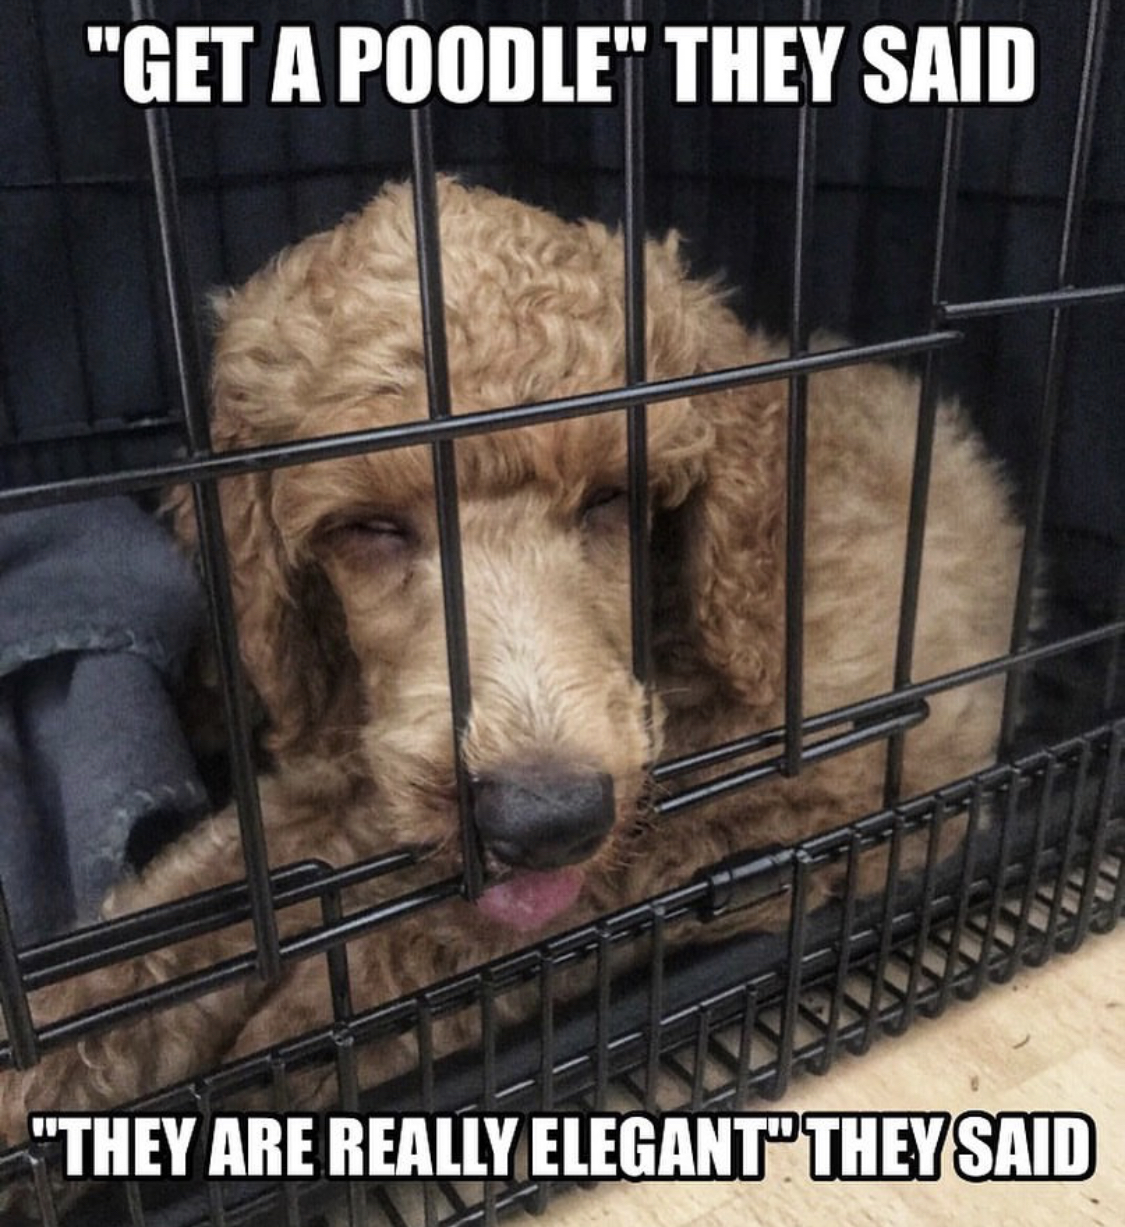 Poodle lying inside its crate photo with a text- Get a poodle they said, they are really elegant they said.